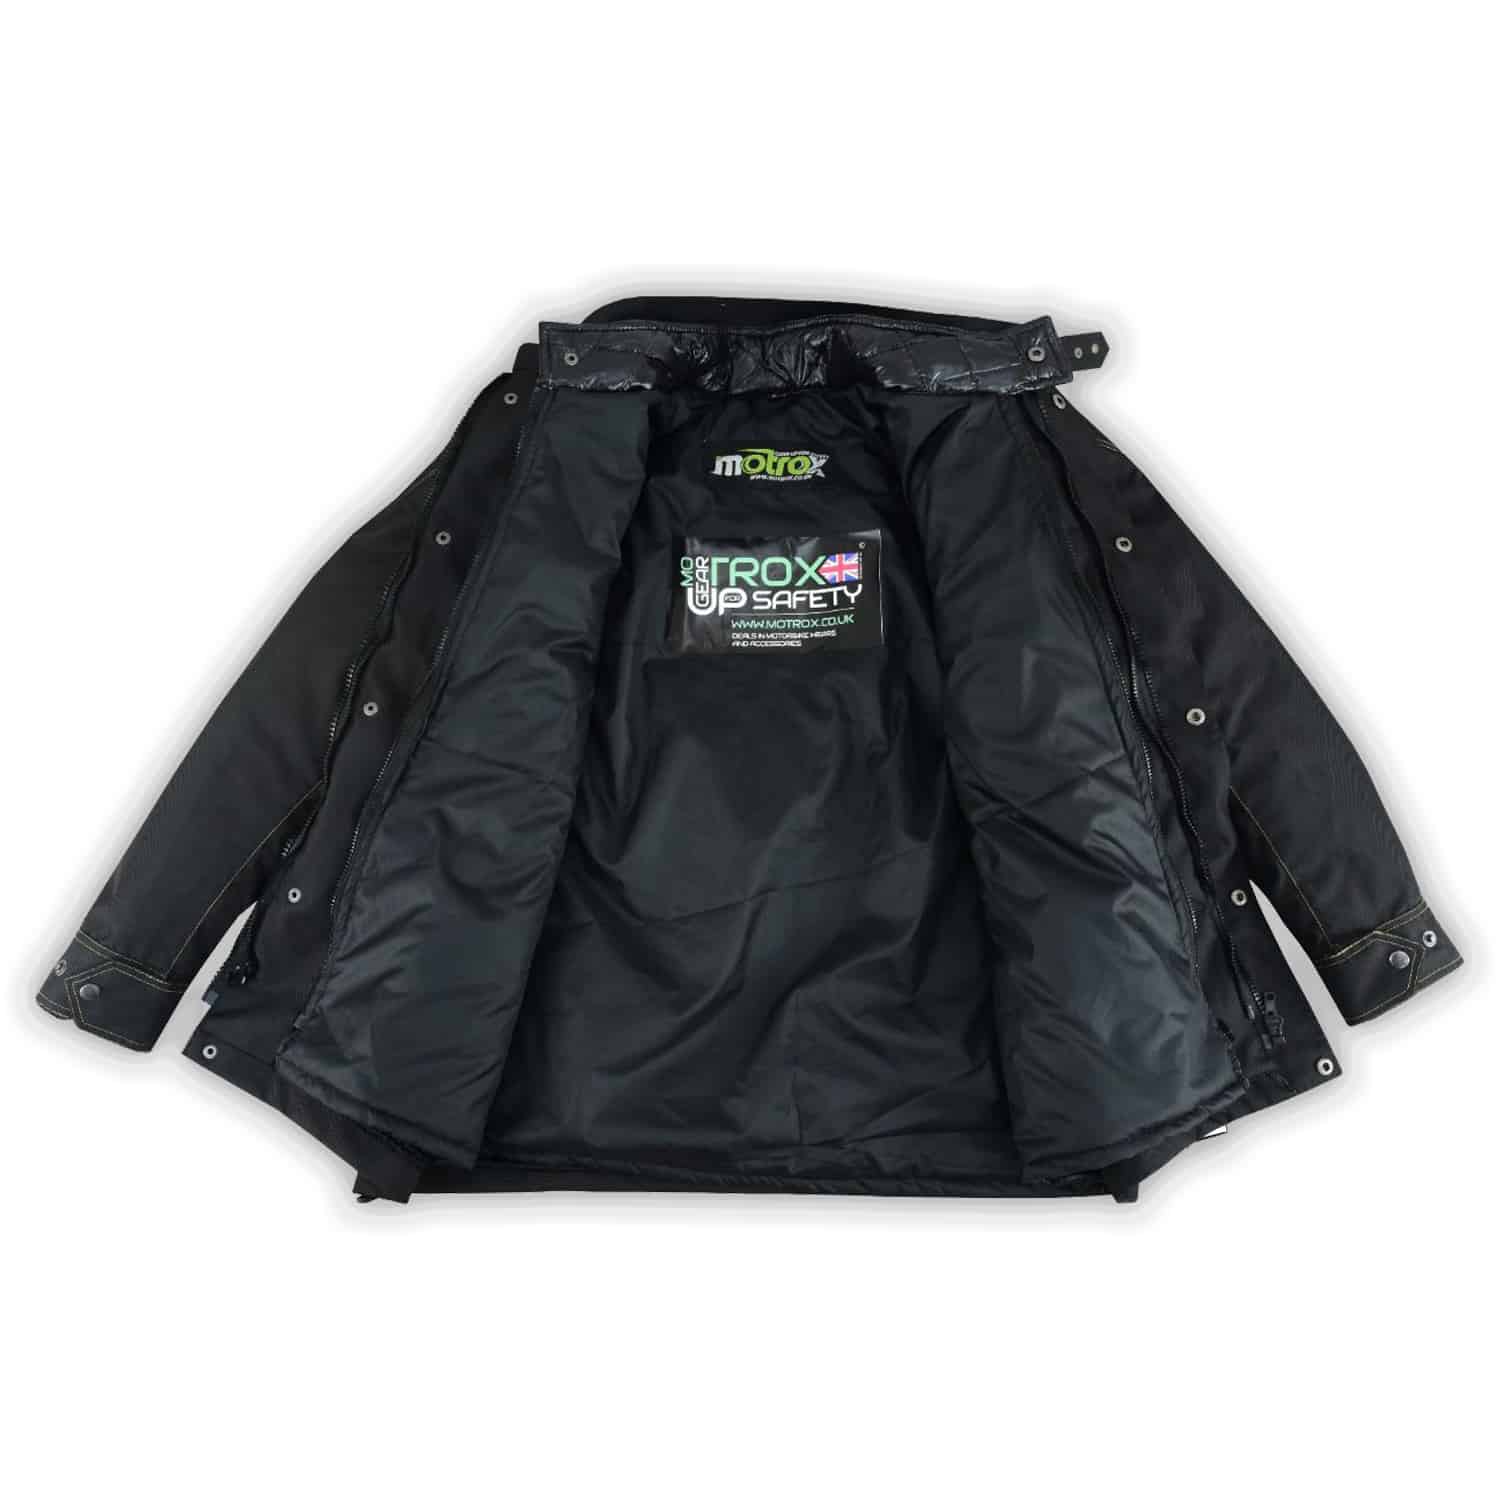 Textile Motorcycle Jacket Adequate for Race & Winter